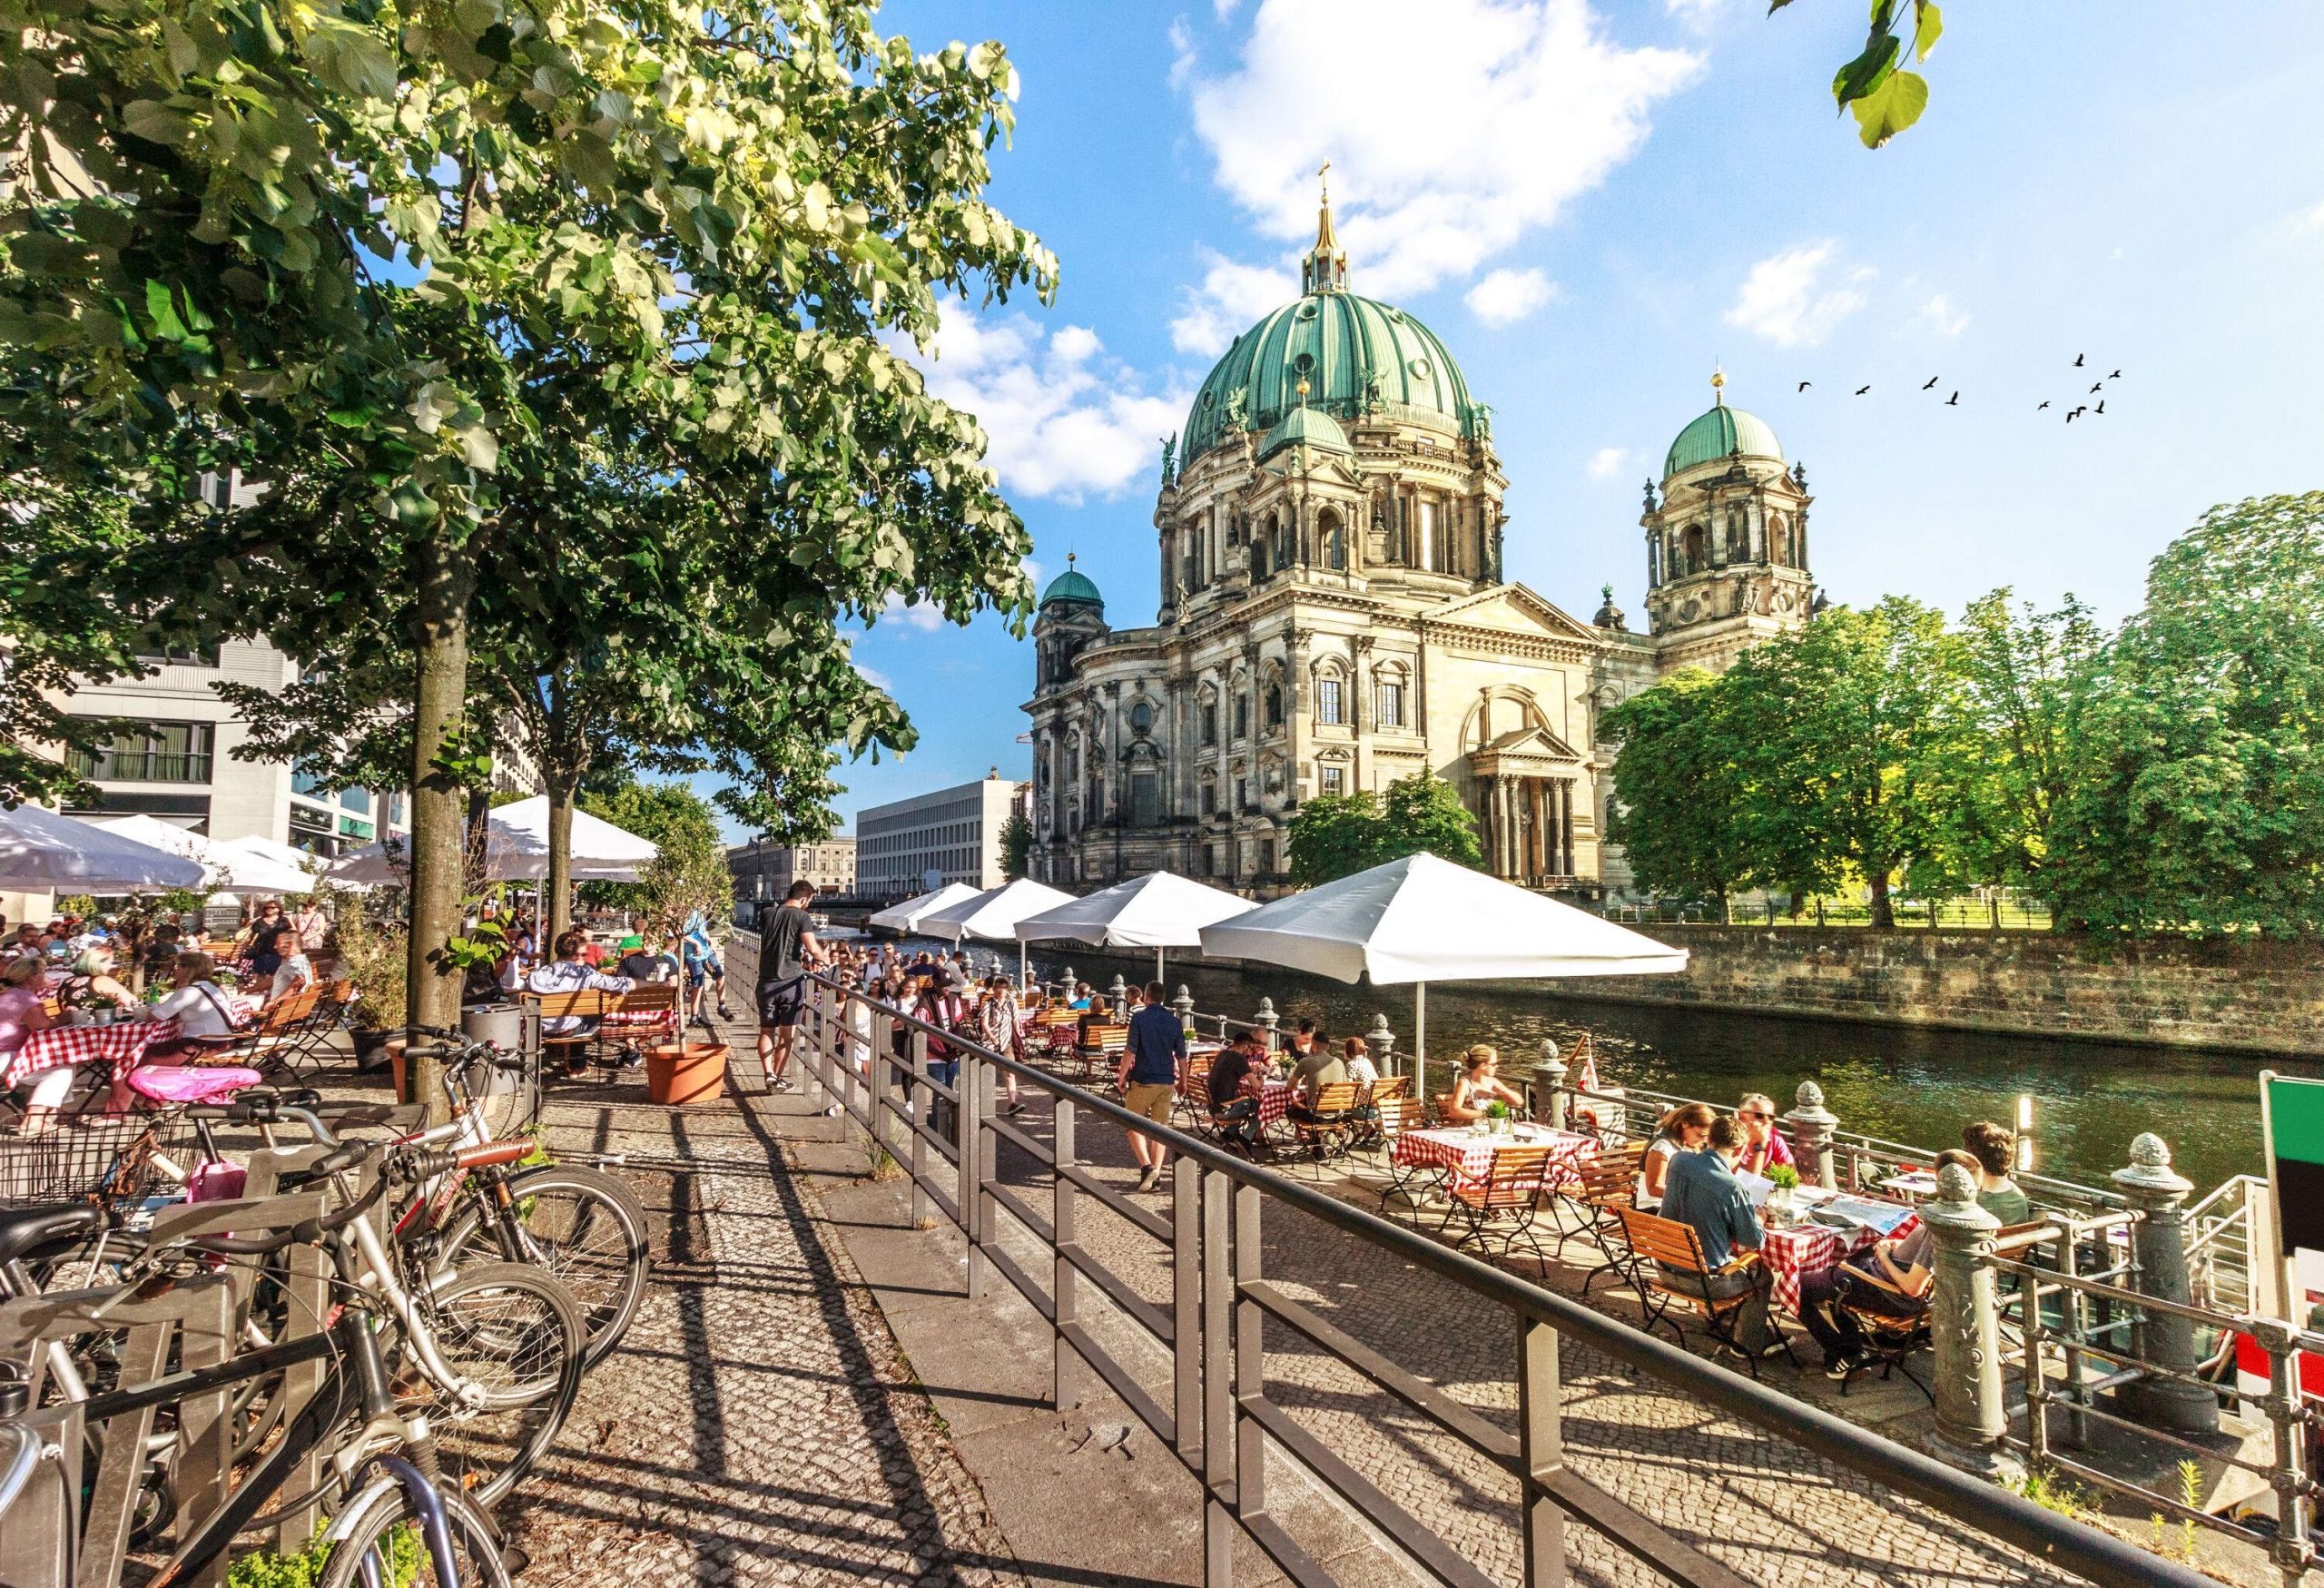 An outdoor café by the river with the Berlin Cathedral in the background.